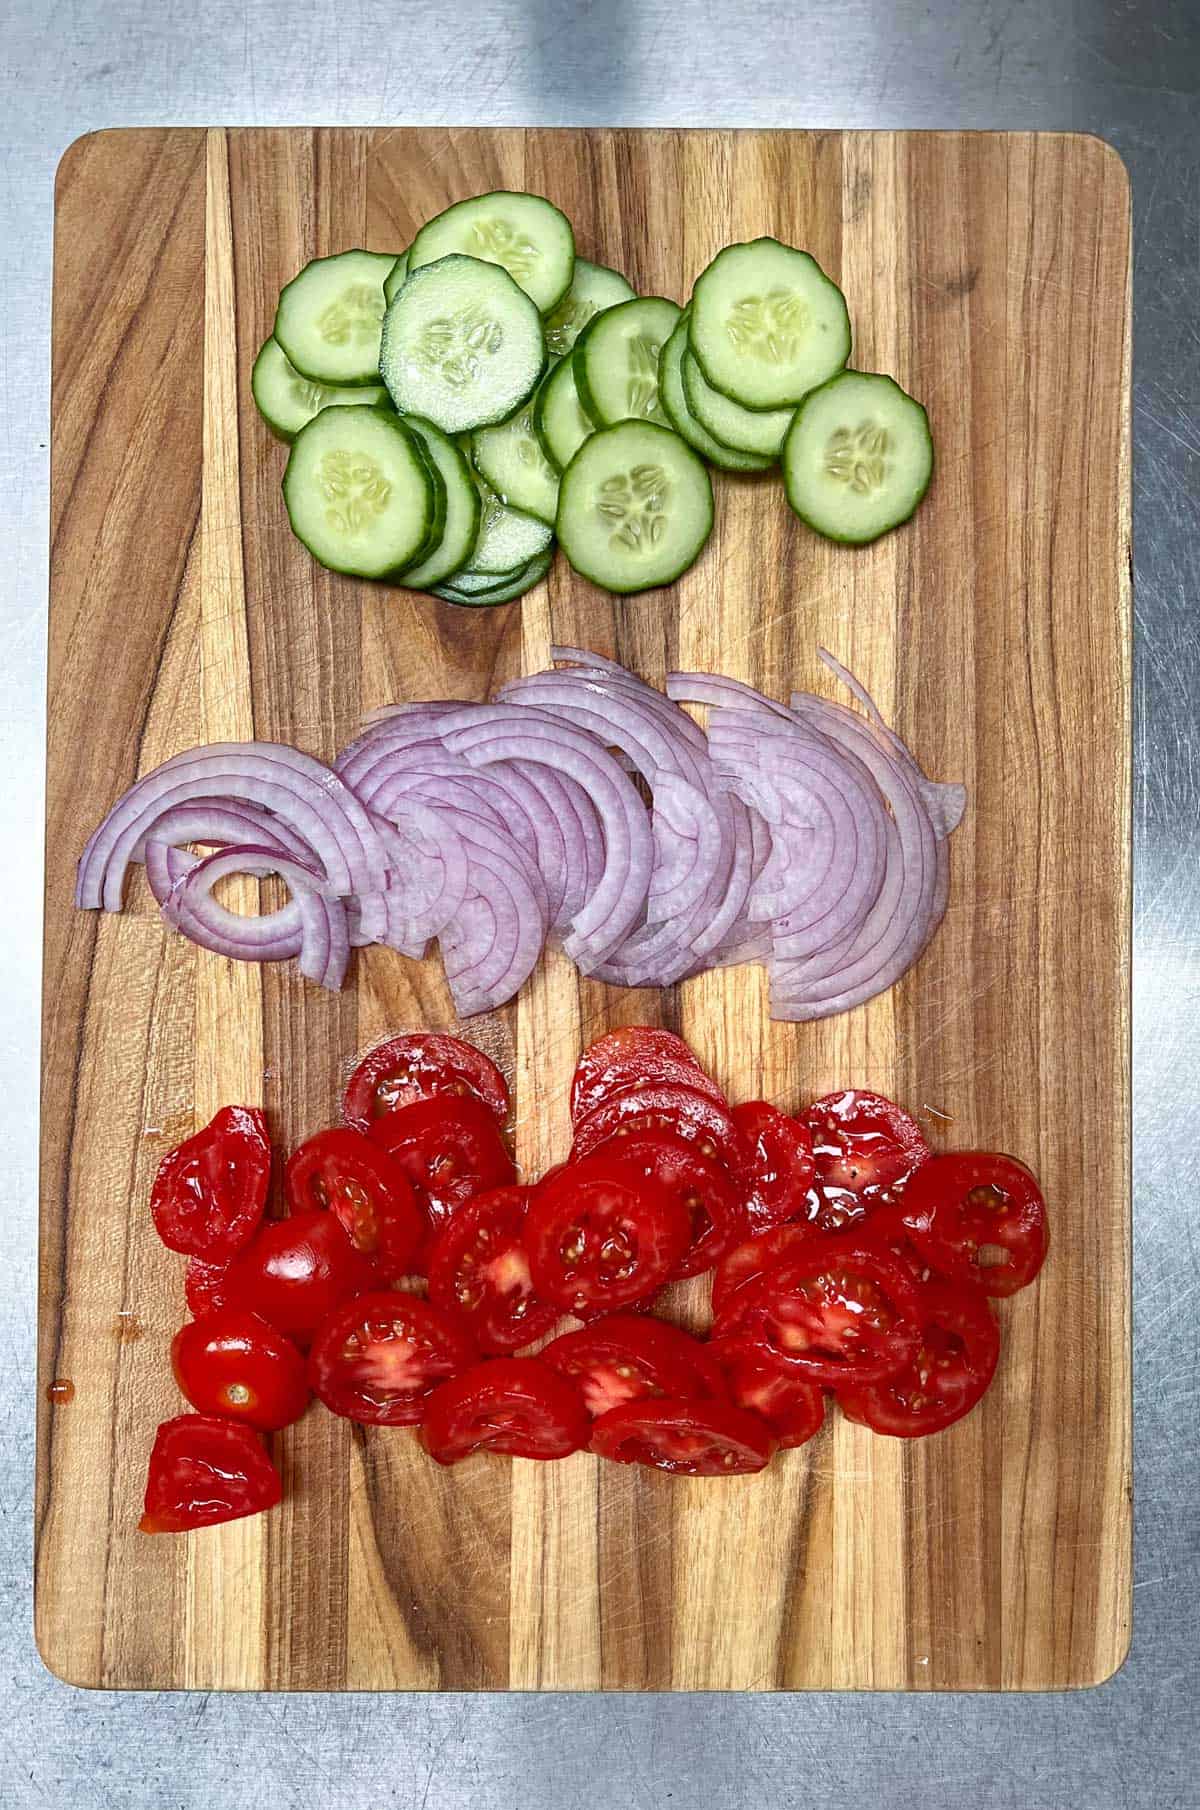 sliced cucumbers, red onions and tomatoes on a cutting board